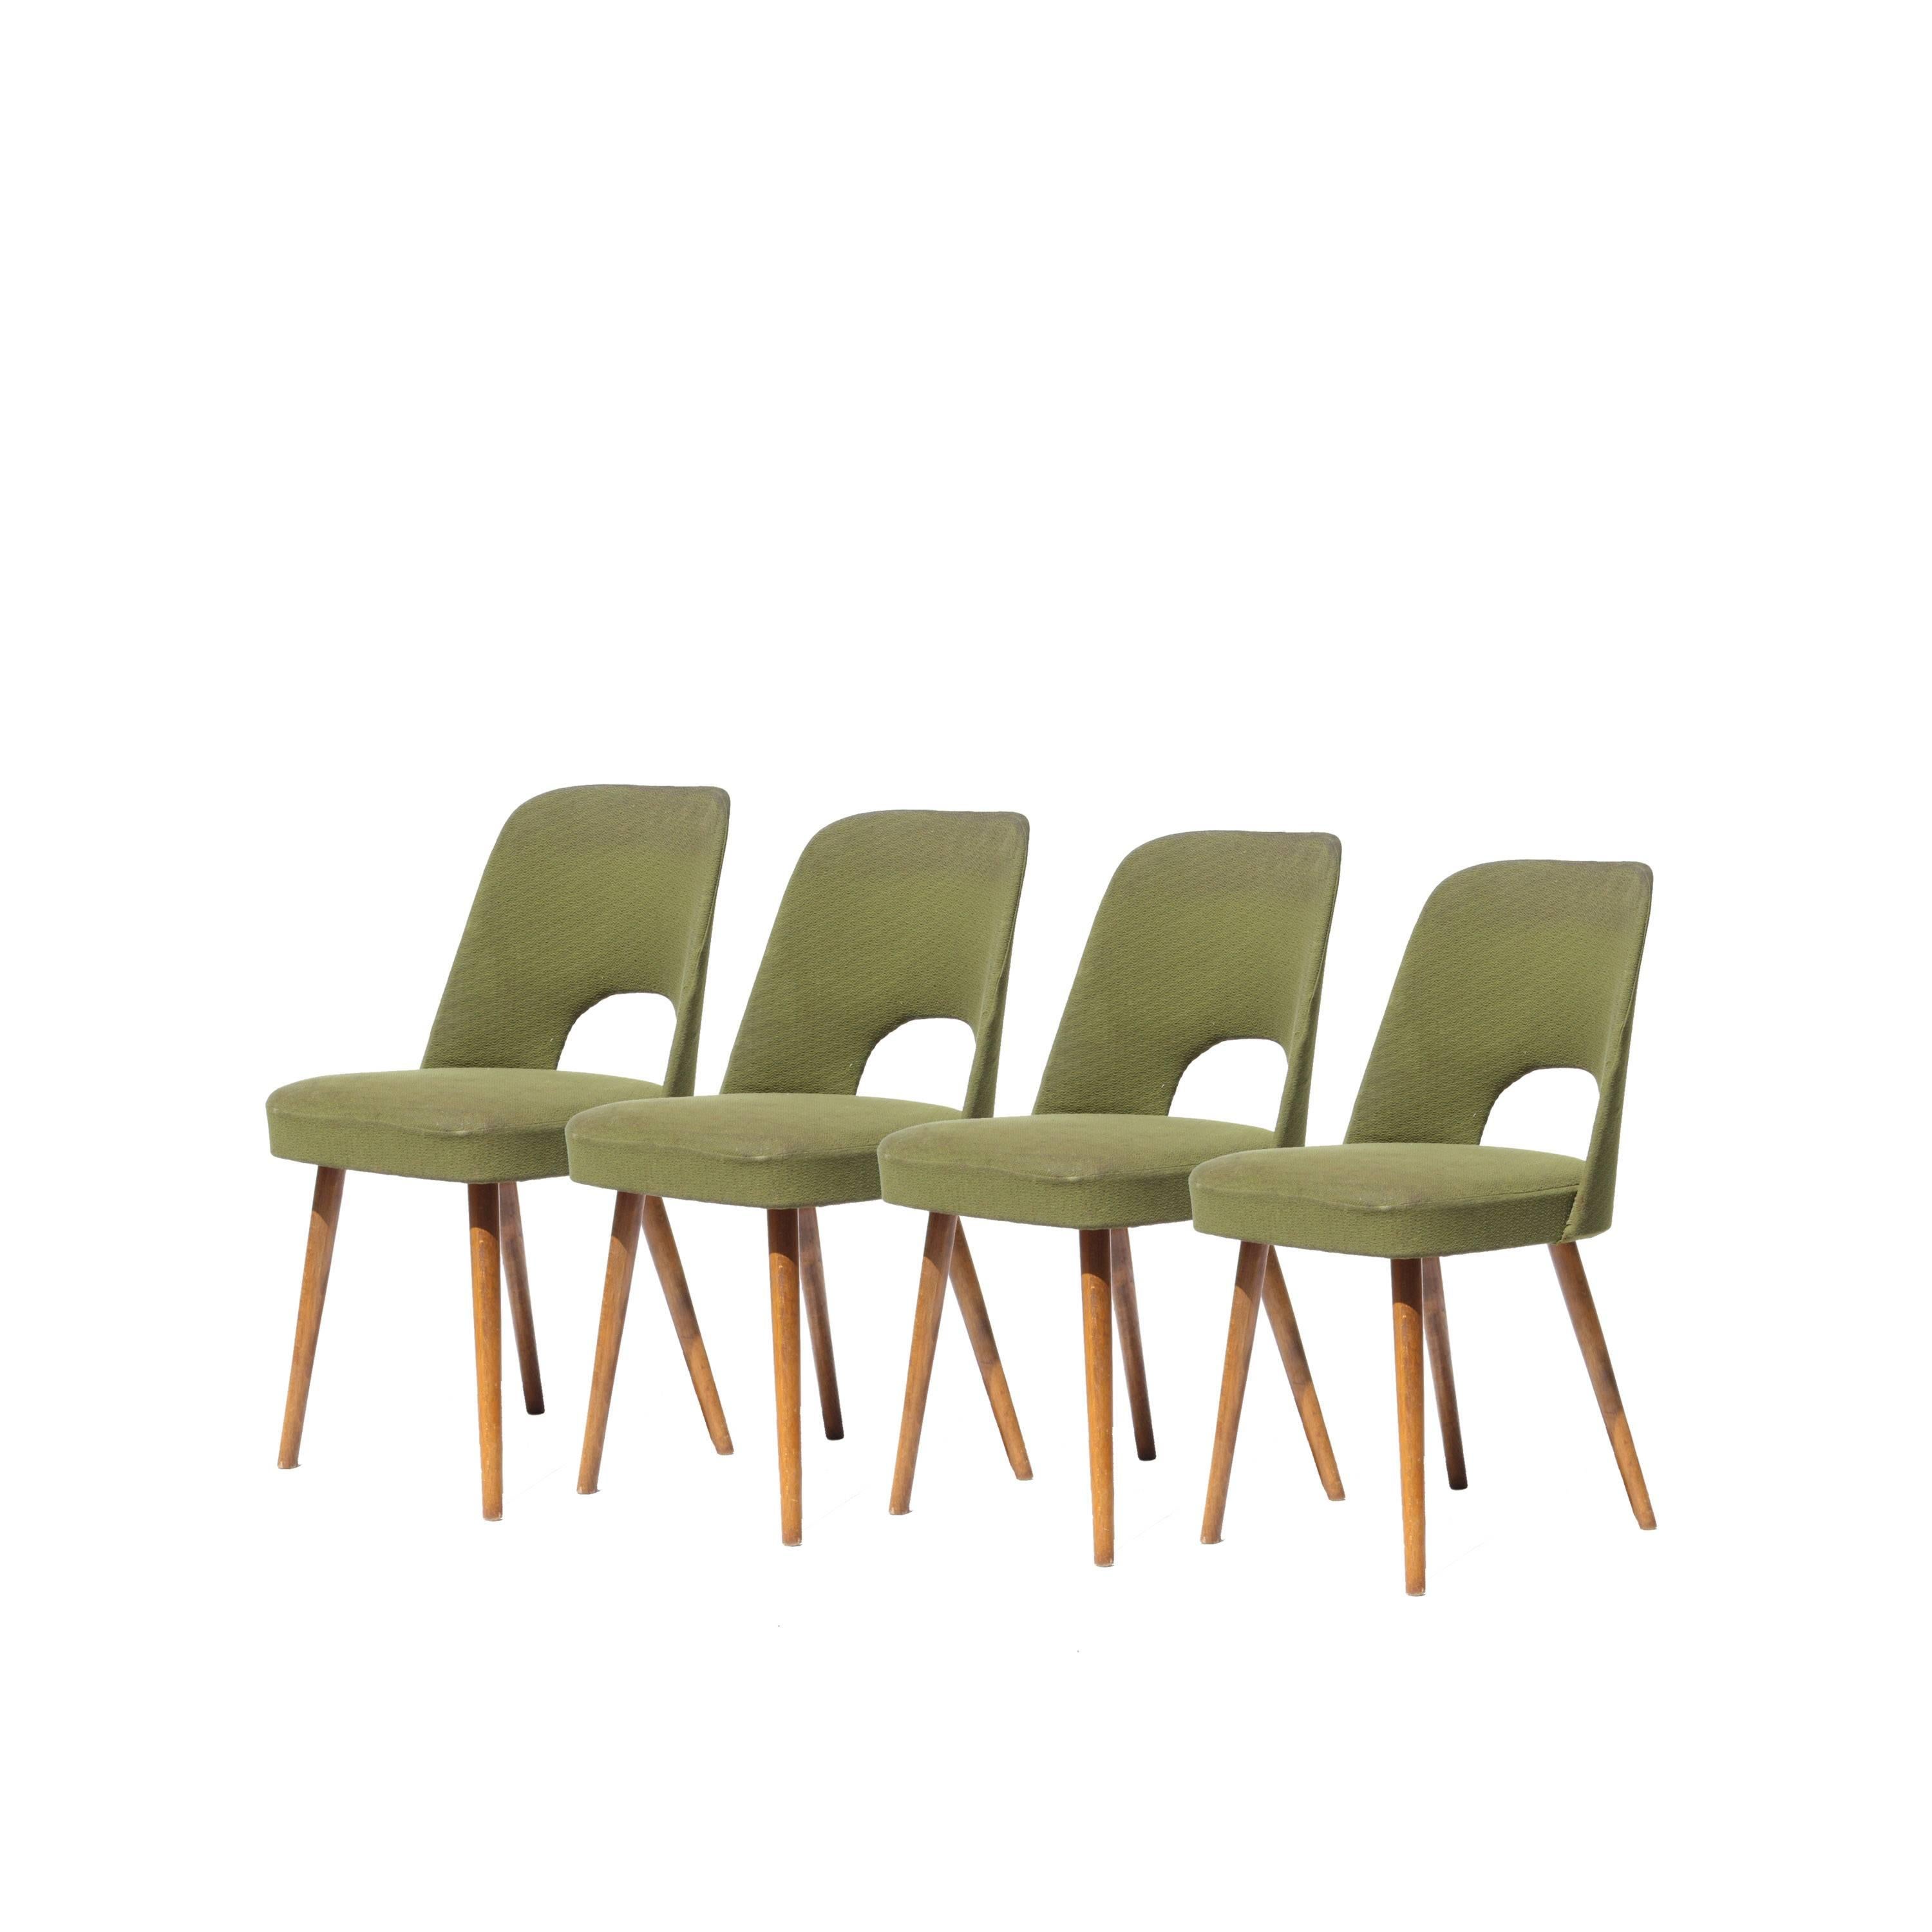 Four chair set made of beechwood in the style of Oswald Haerdtl. Green upholstery.